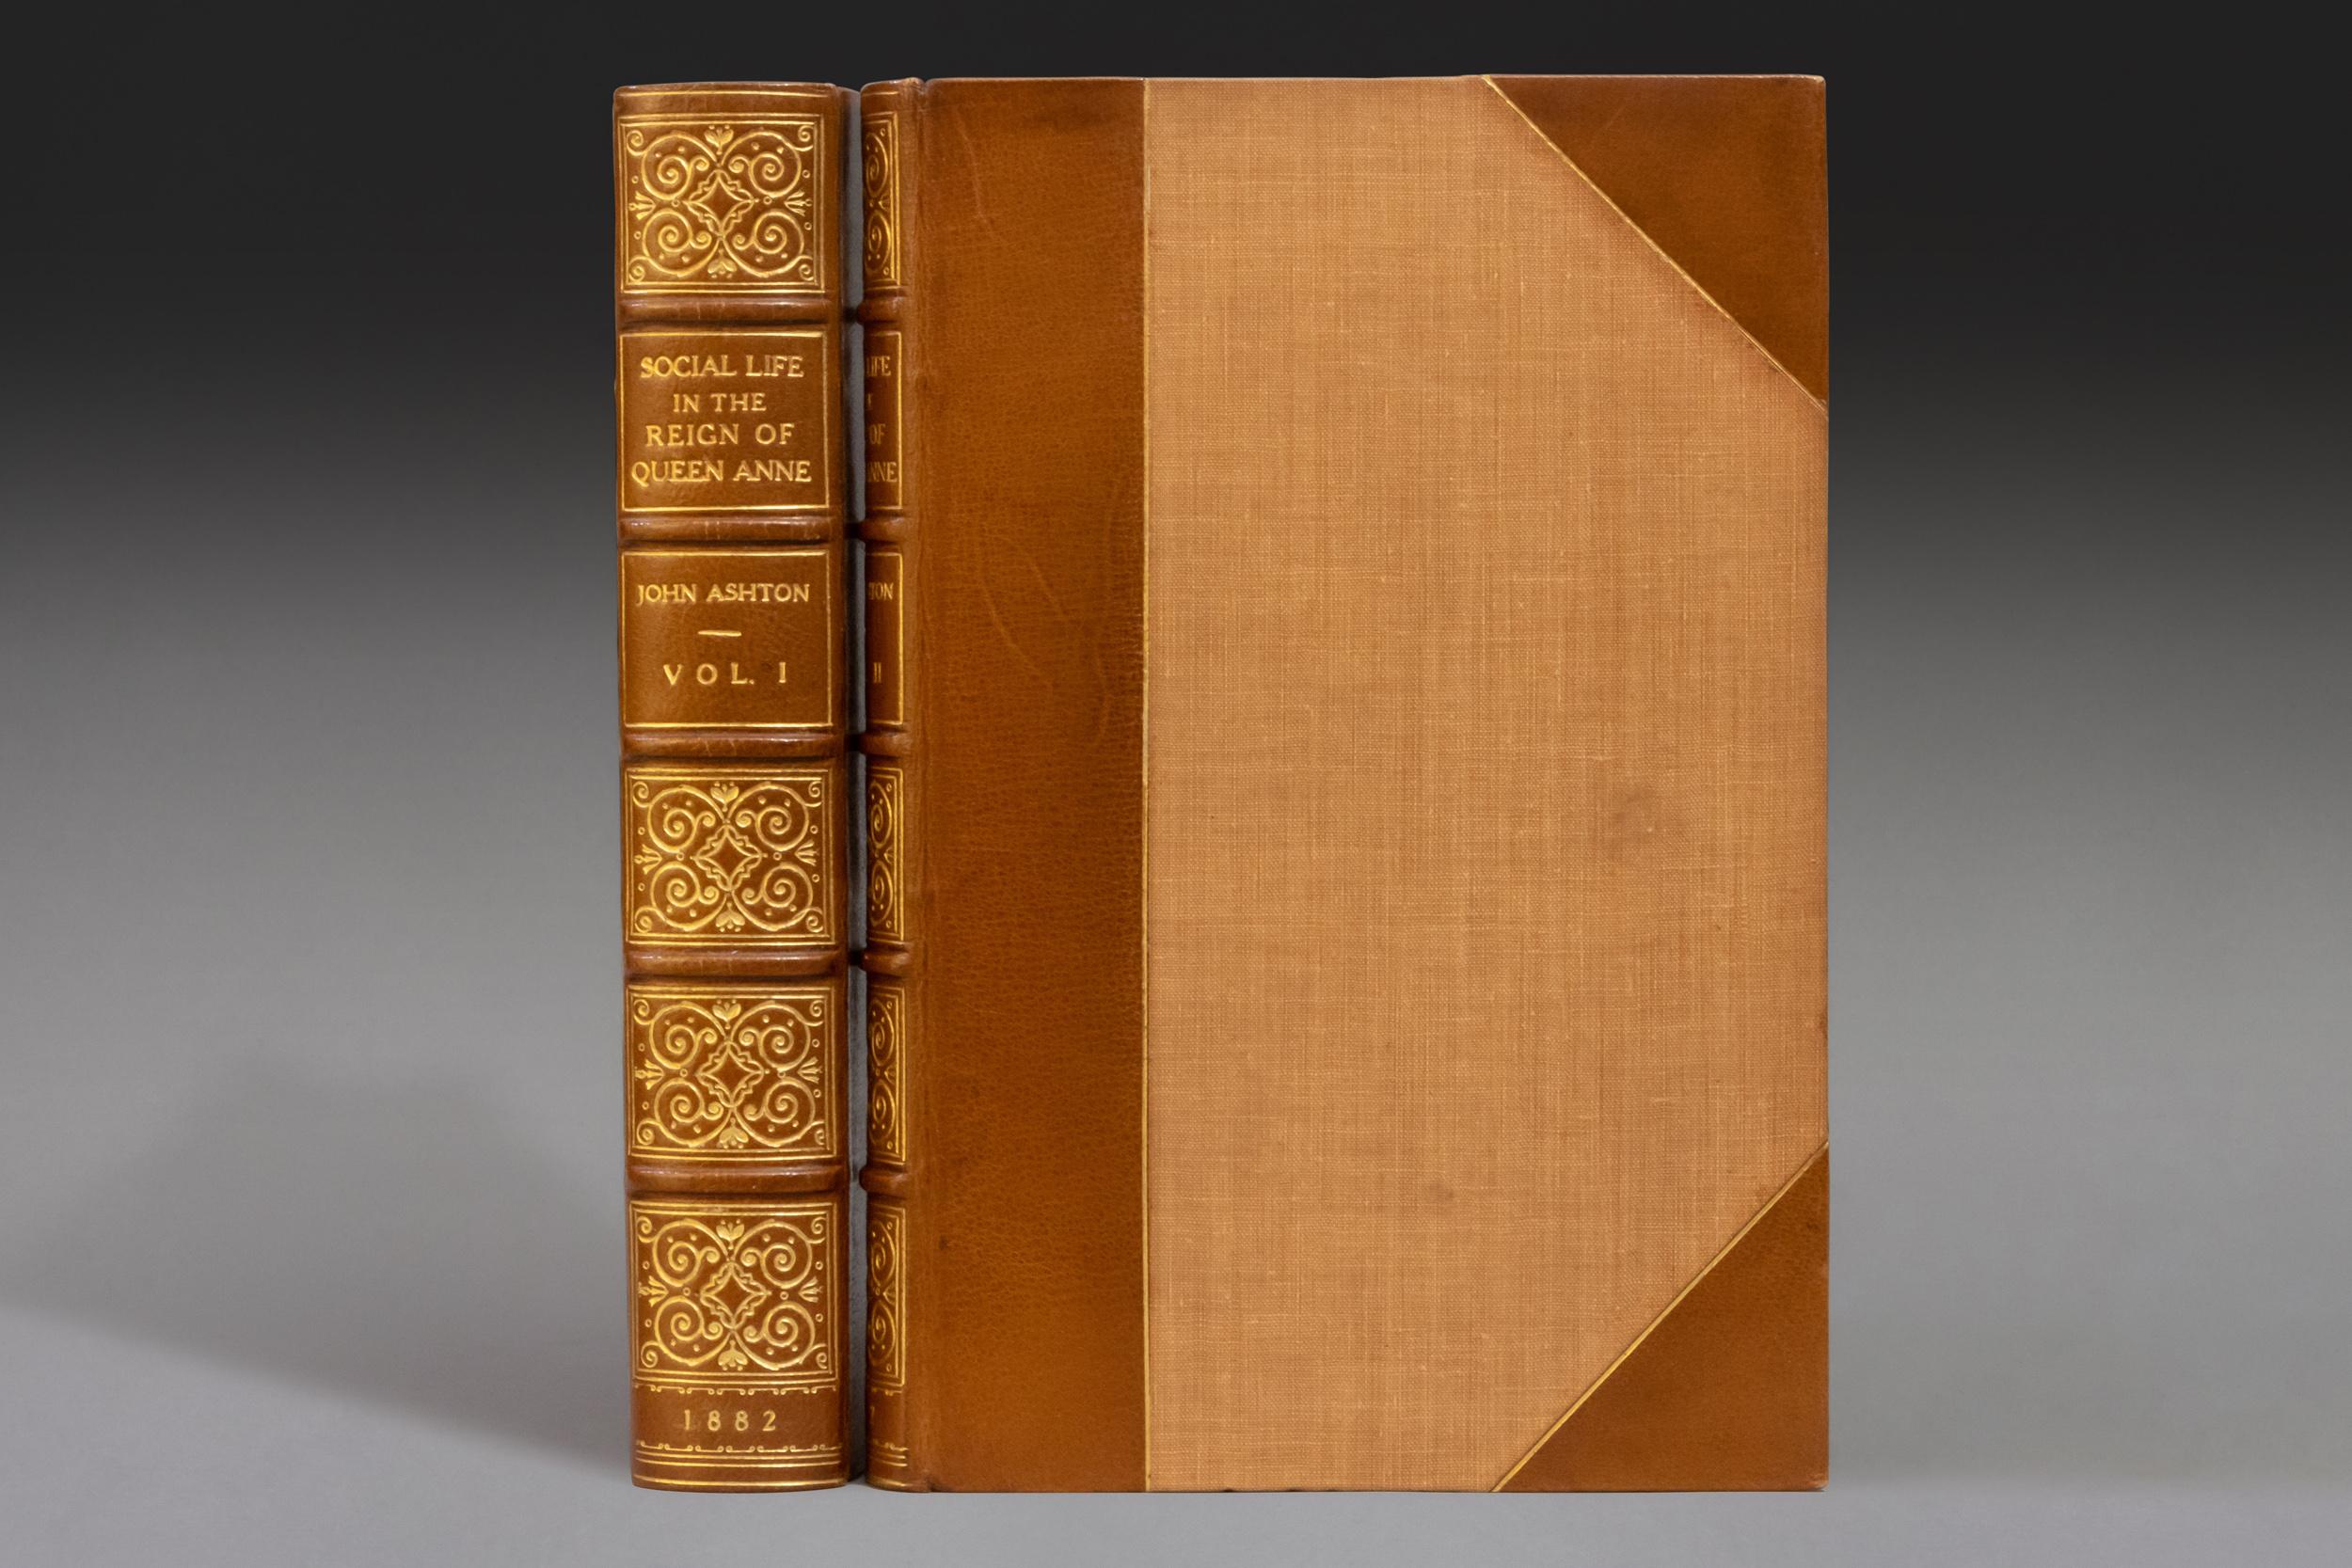 2 Volumes. John Ashton, The Social Life in the Reign of Queen Anne taken from original sources. Bound in 3/4 light brown morocco. Top edges gilt. Spines gilt, by Stikeman. Morocco booklabel and large bookplate of Henry Clay Frick. Published: London: